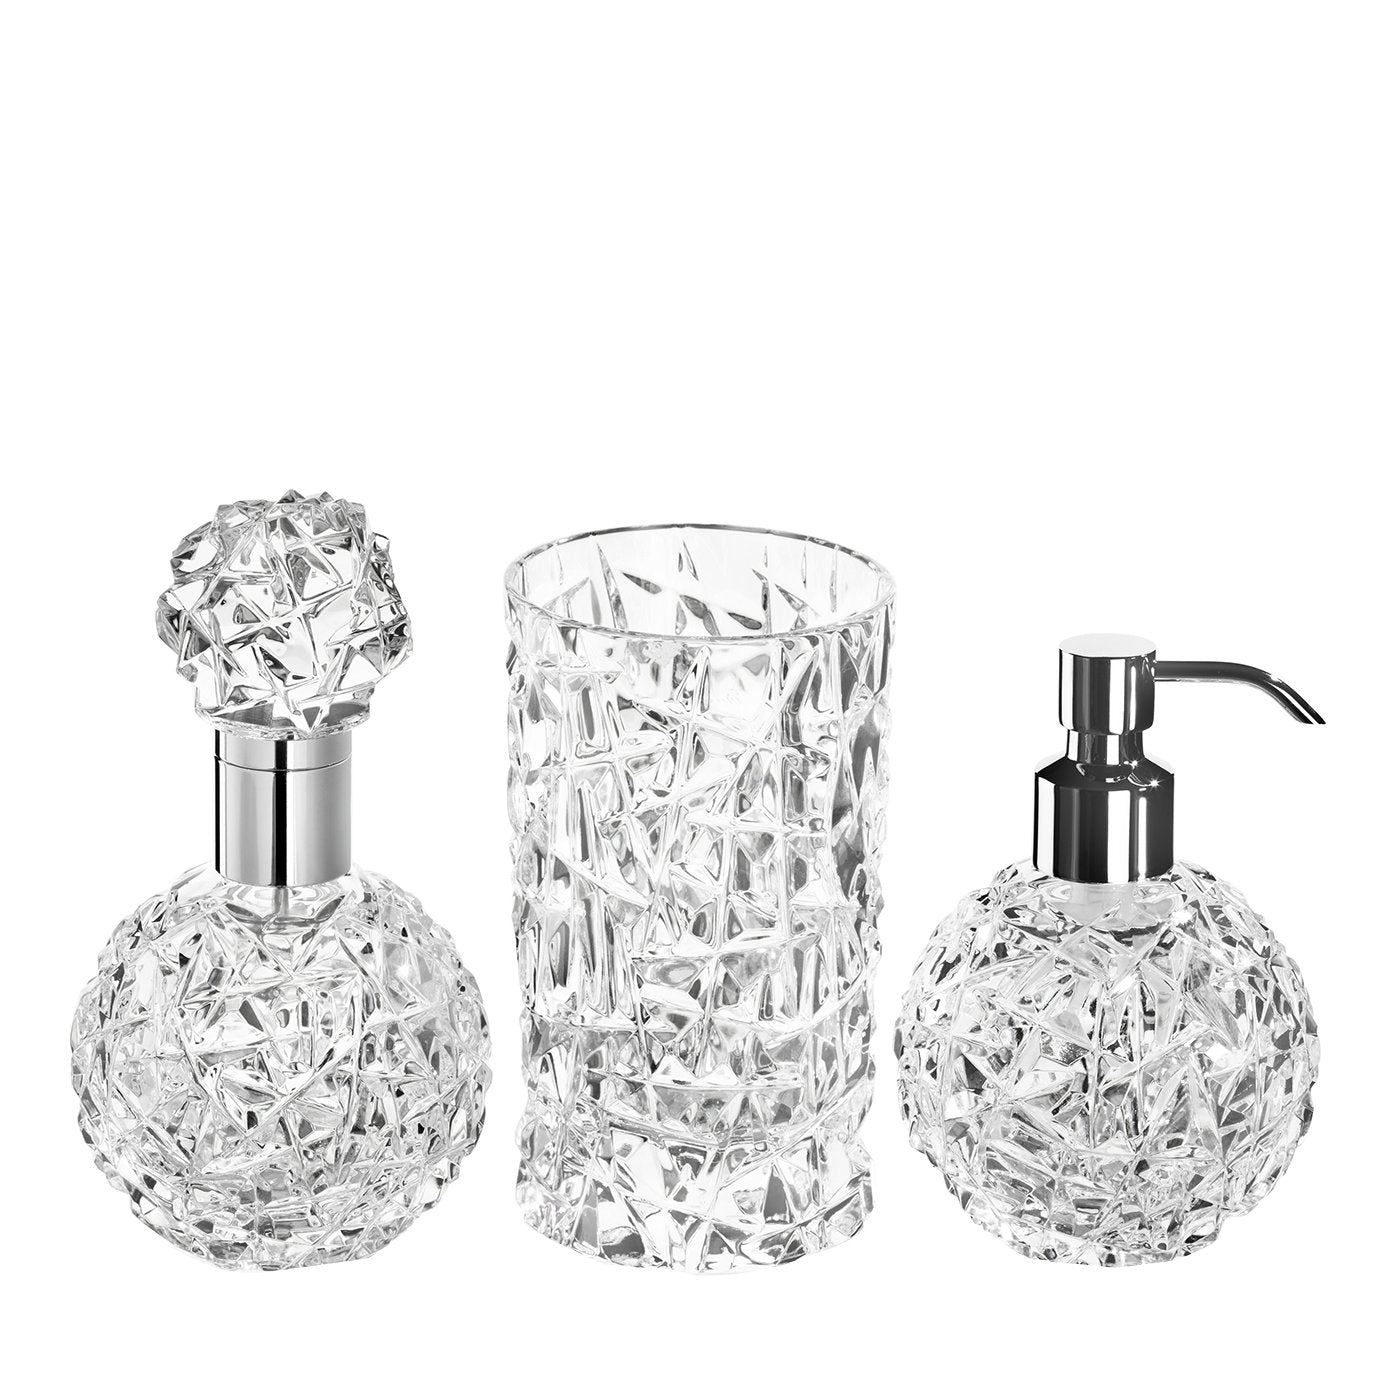 Spa Sinfonia Set of 3 Bathroom Pieces - Main view